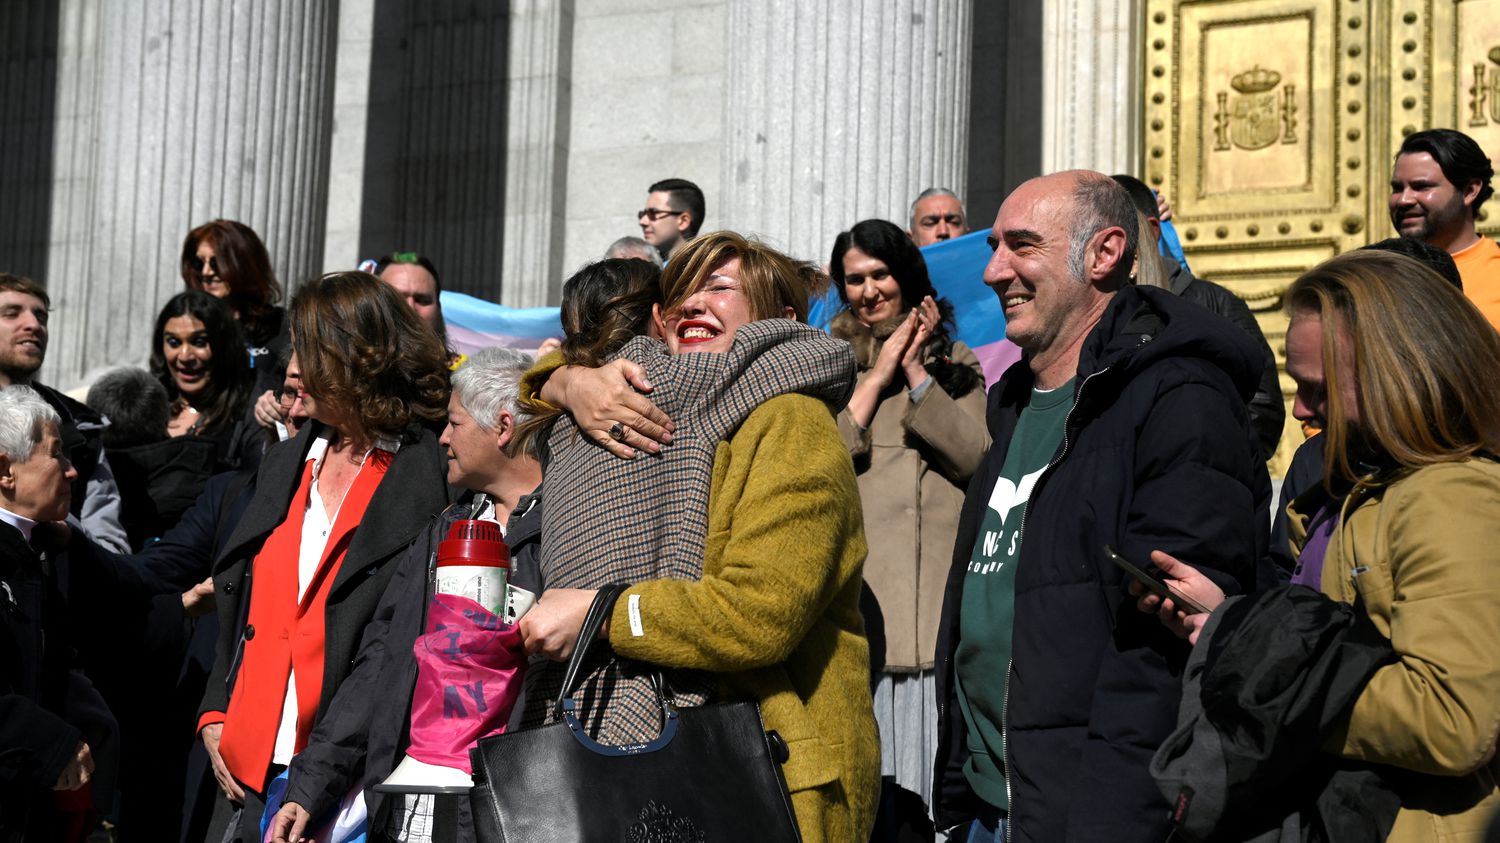 Spain adopts a law allowing free gender change in the civil registry from the age of 16
